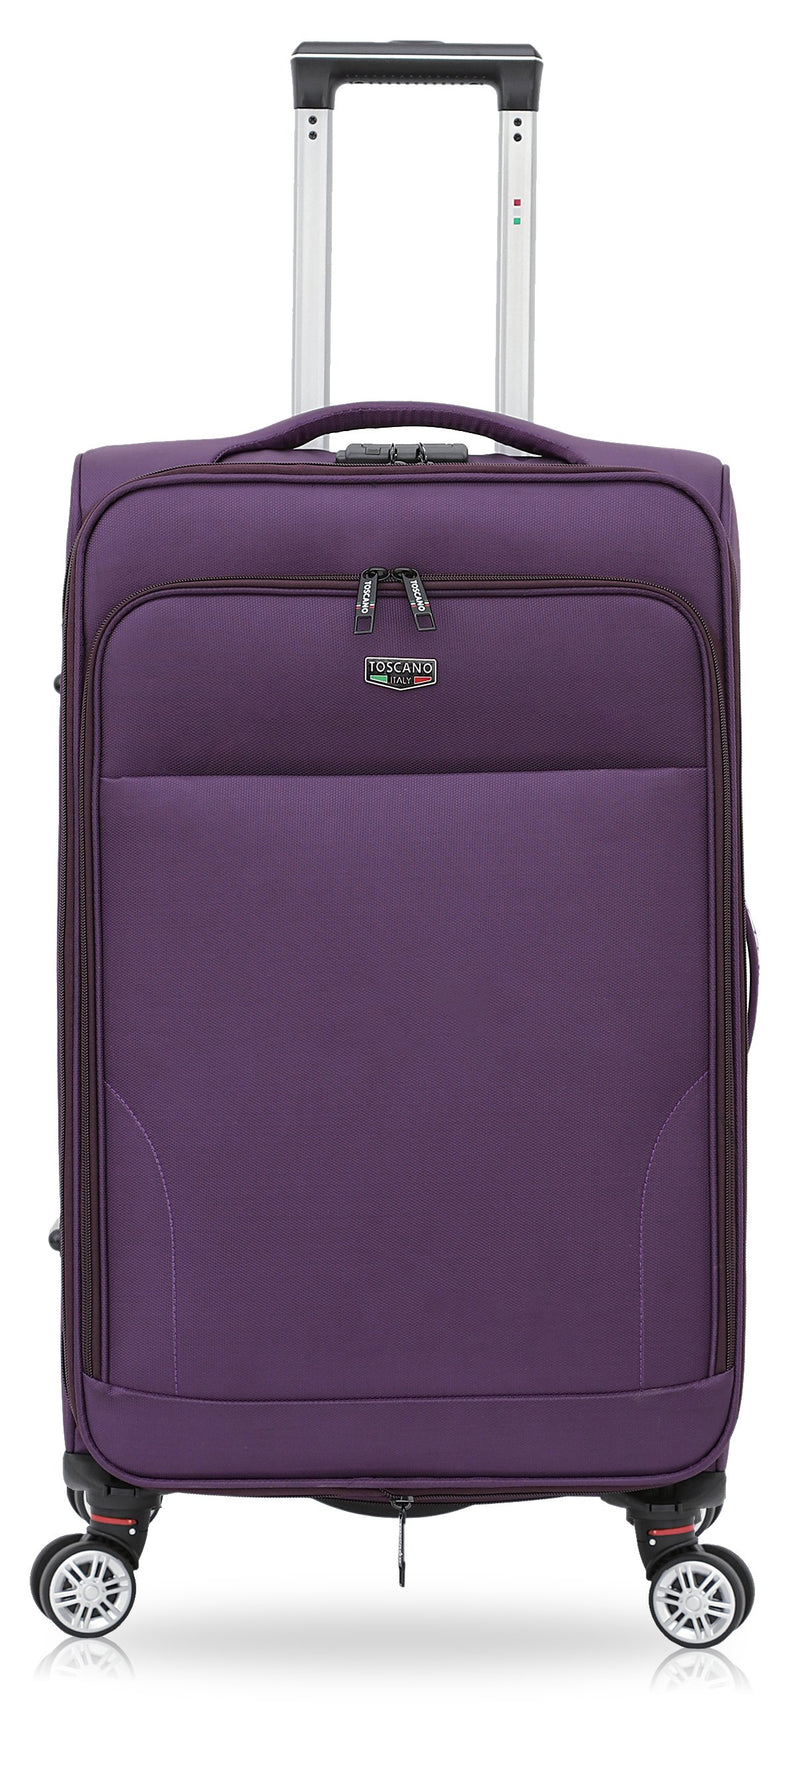 TOSCANO 23-inch Ricerca Lightweight Carry On  Luggage Suitcase